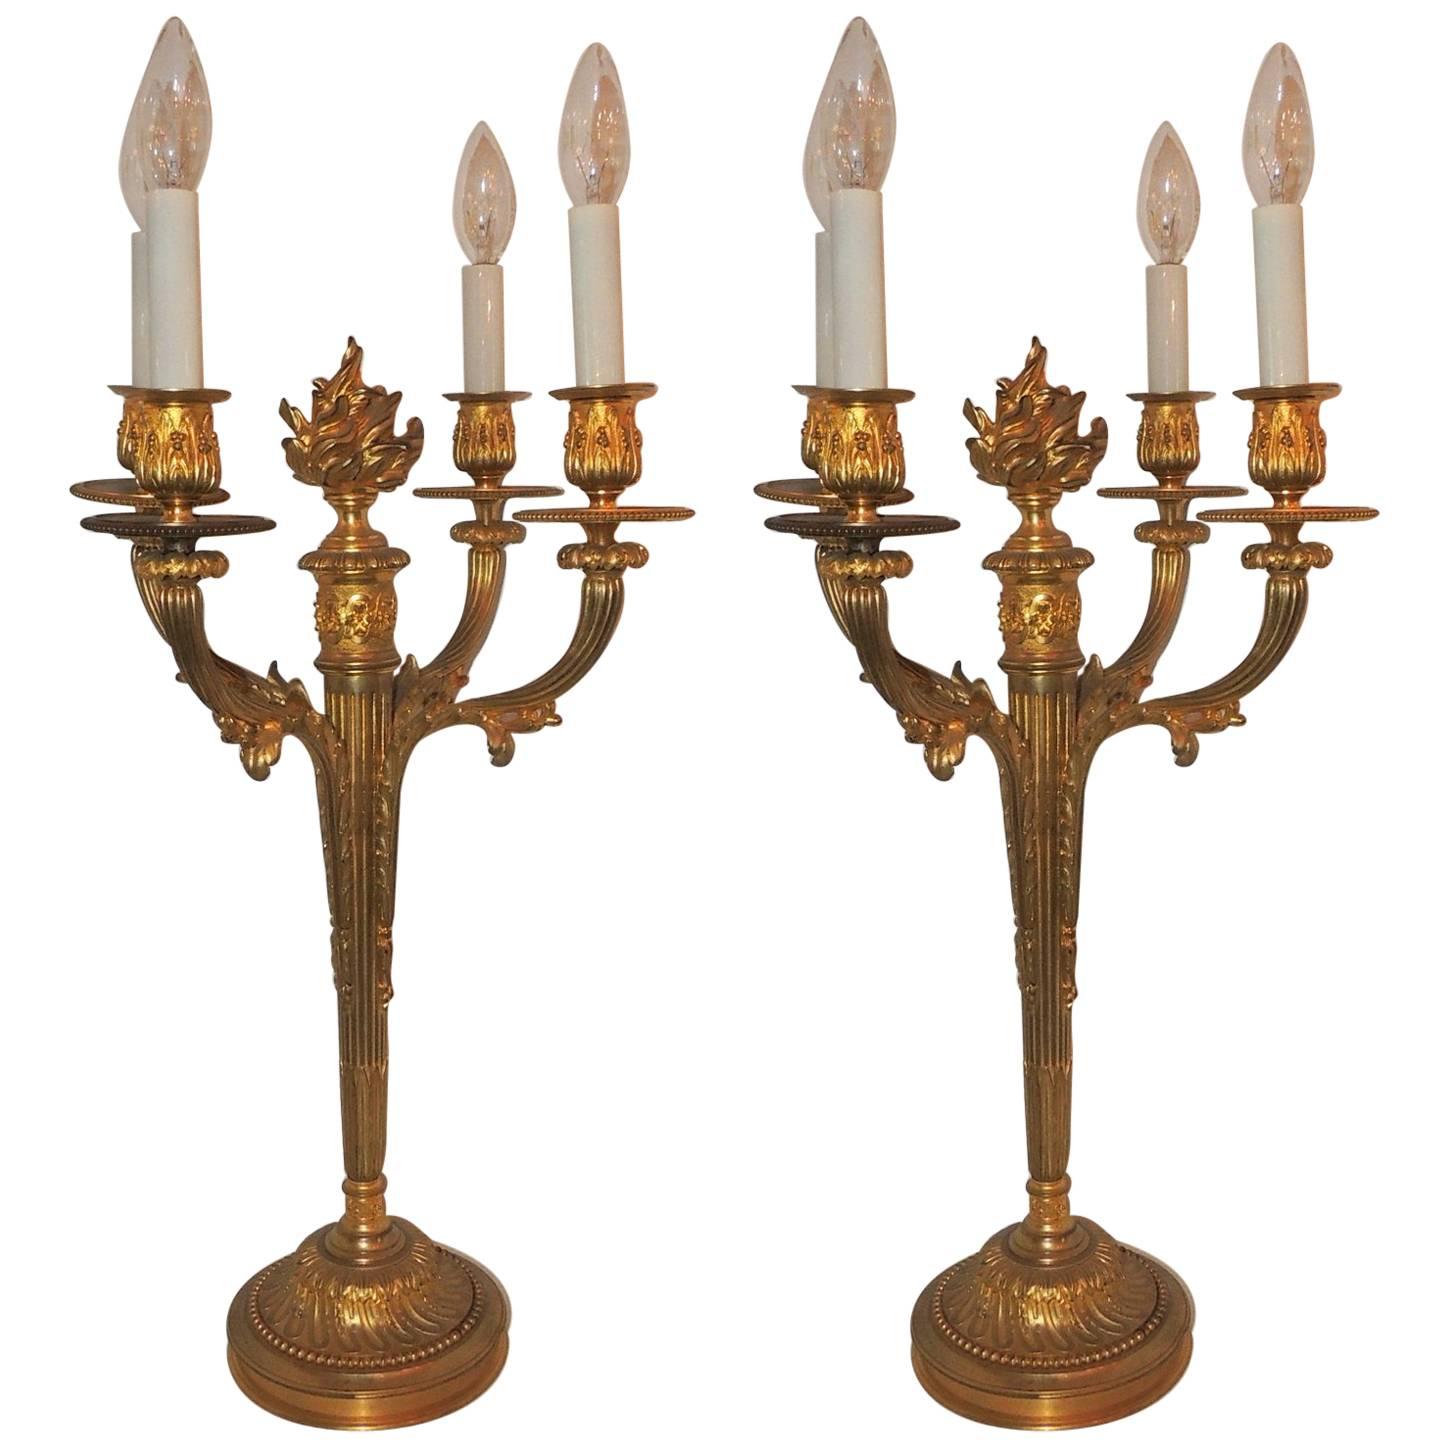 Wonderful Pair French Neoclassical Dore Bronze Regency Four-Arm Candelabra Lamps For Sale